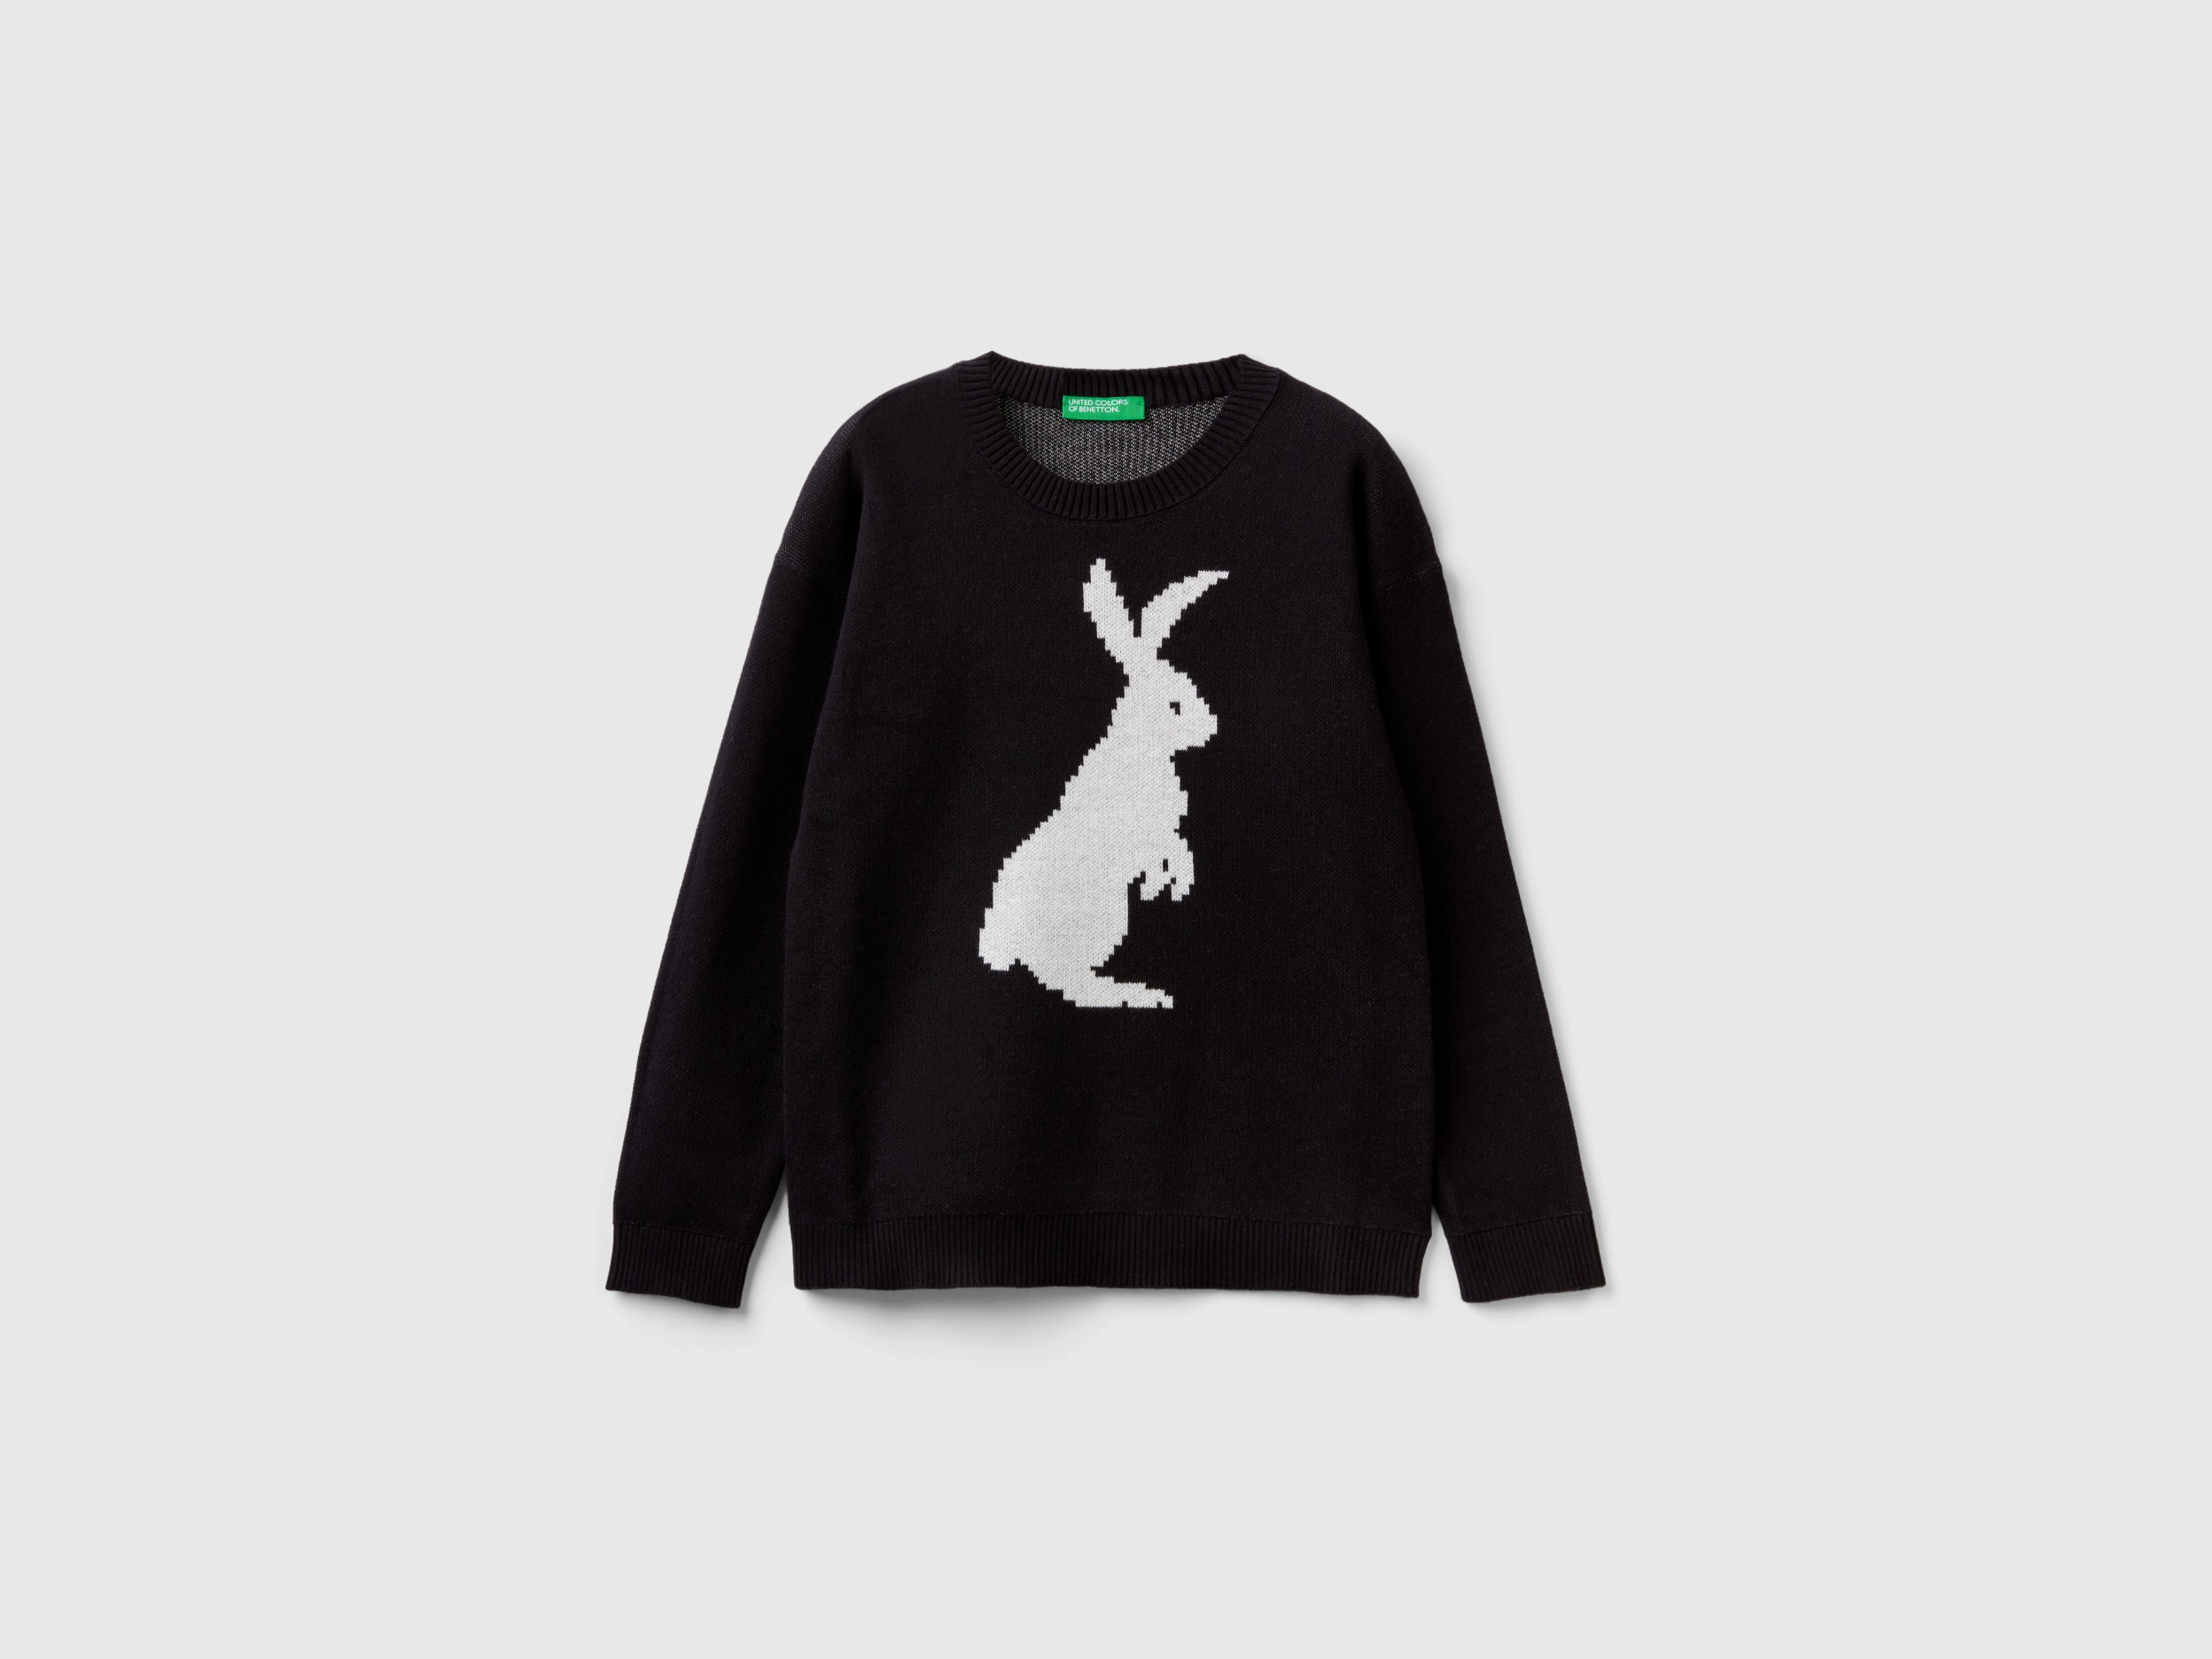 Benetton, Sweater With Bunny Design, size L, Black, Kids